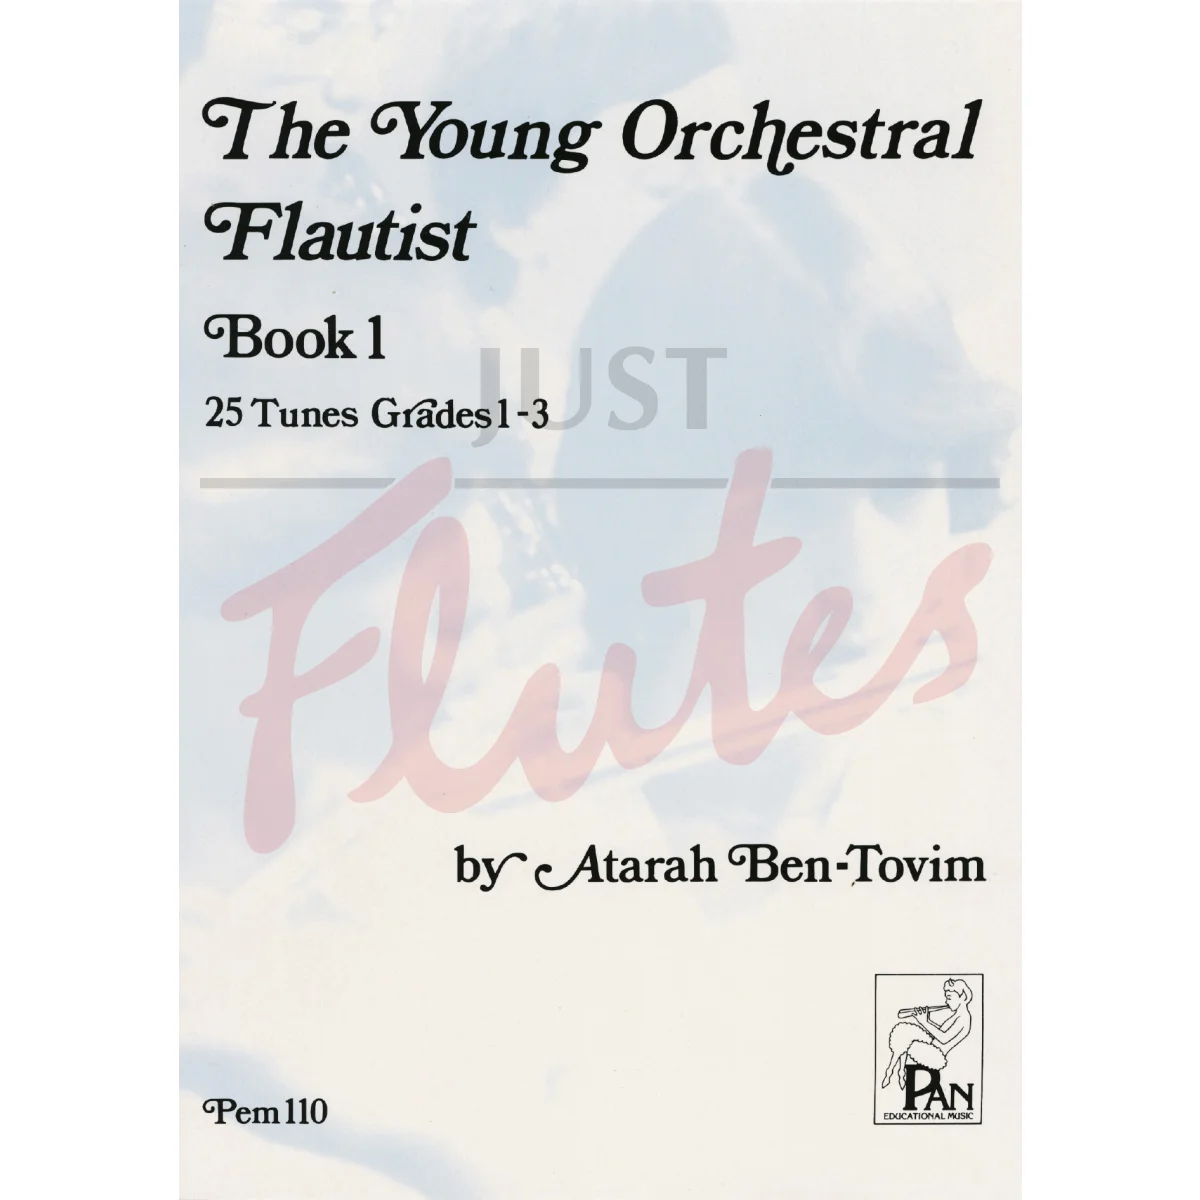 The Young Orchestral Flautist Book 1